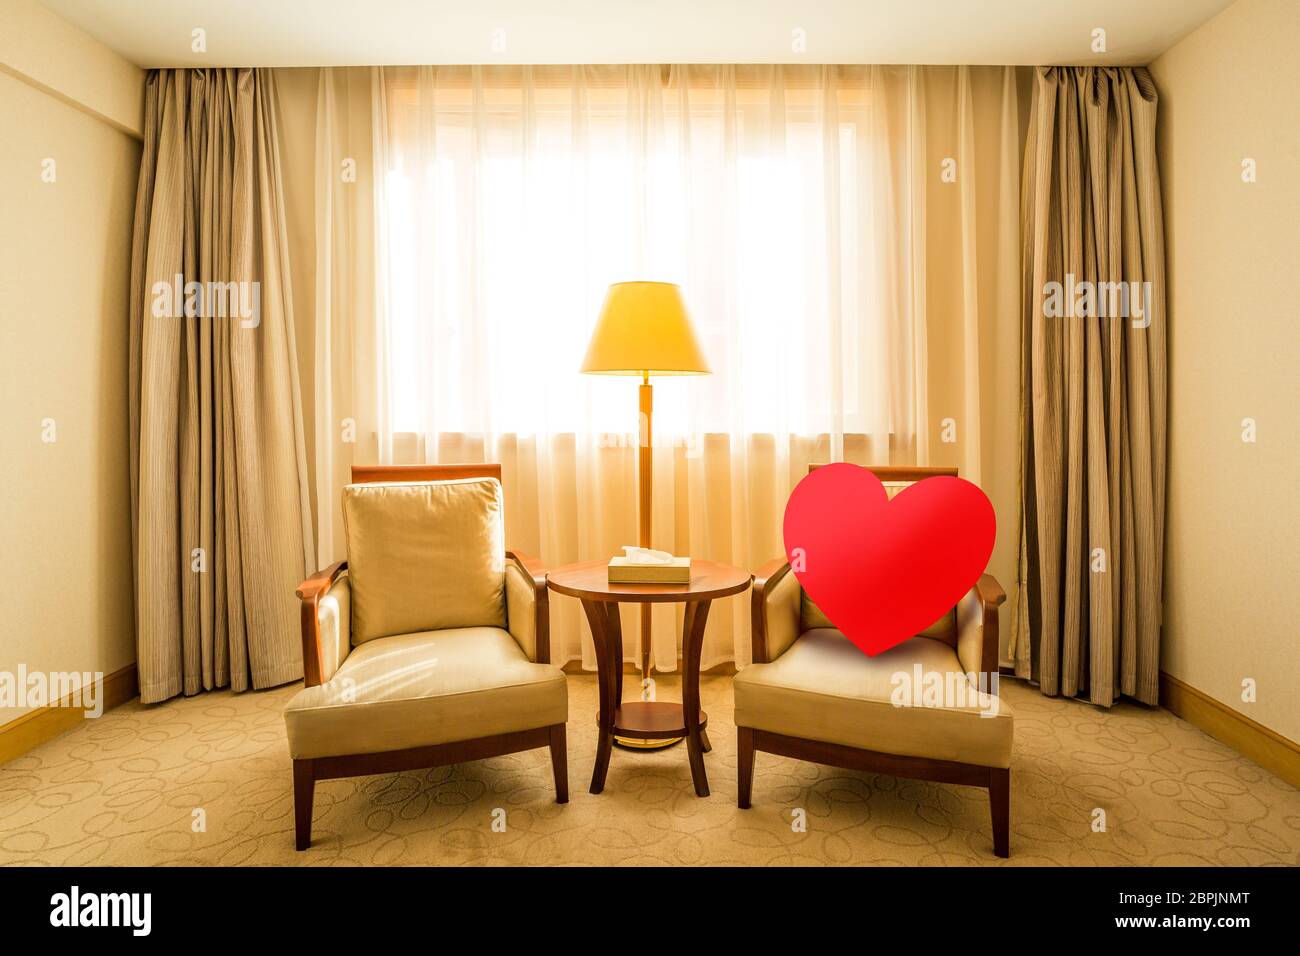 red heart sit on wooden chair, loneliness and waiting for someone or love concept Stock Photo